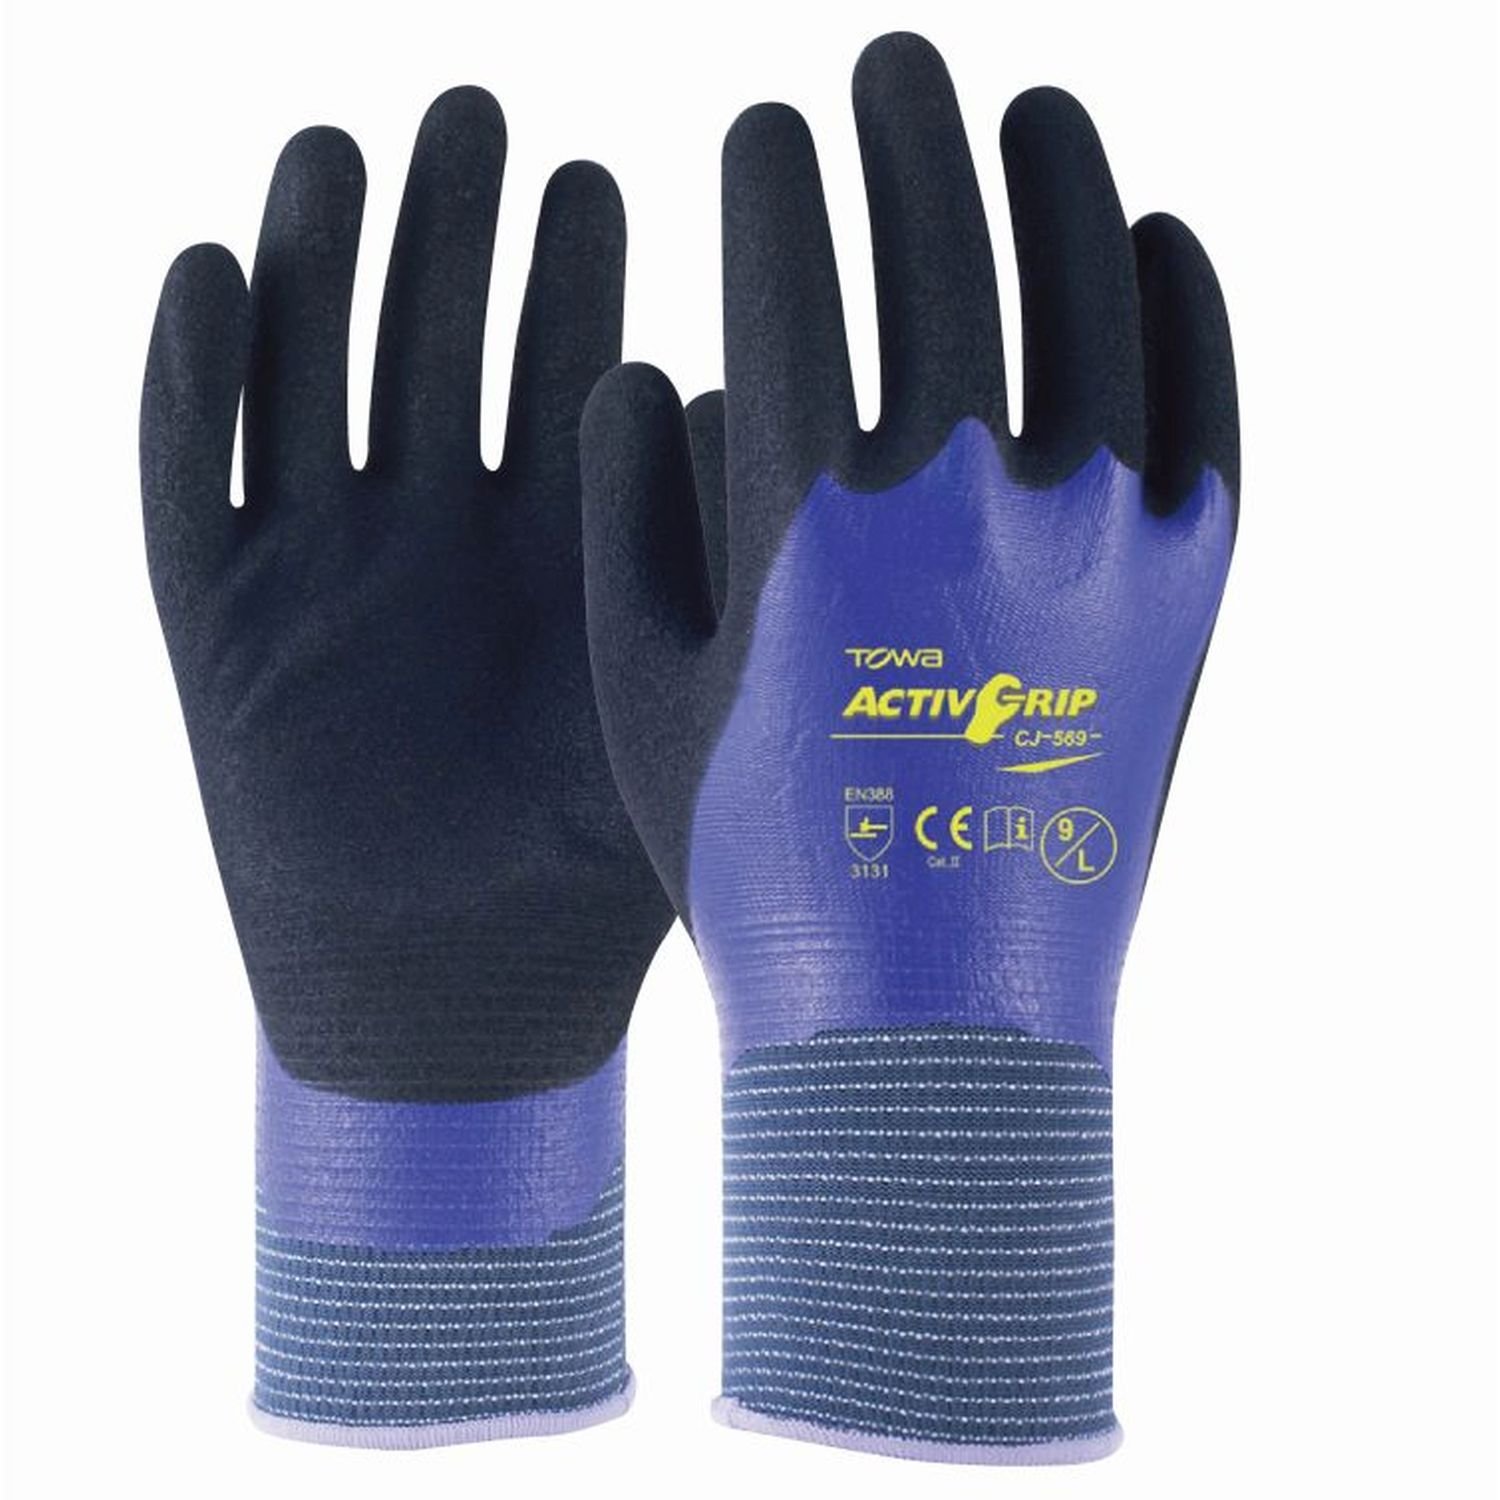 ActivGrip 569 Double Layer Nitrile Full Dip Gloves